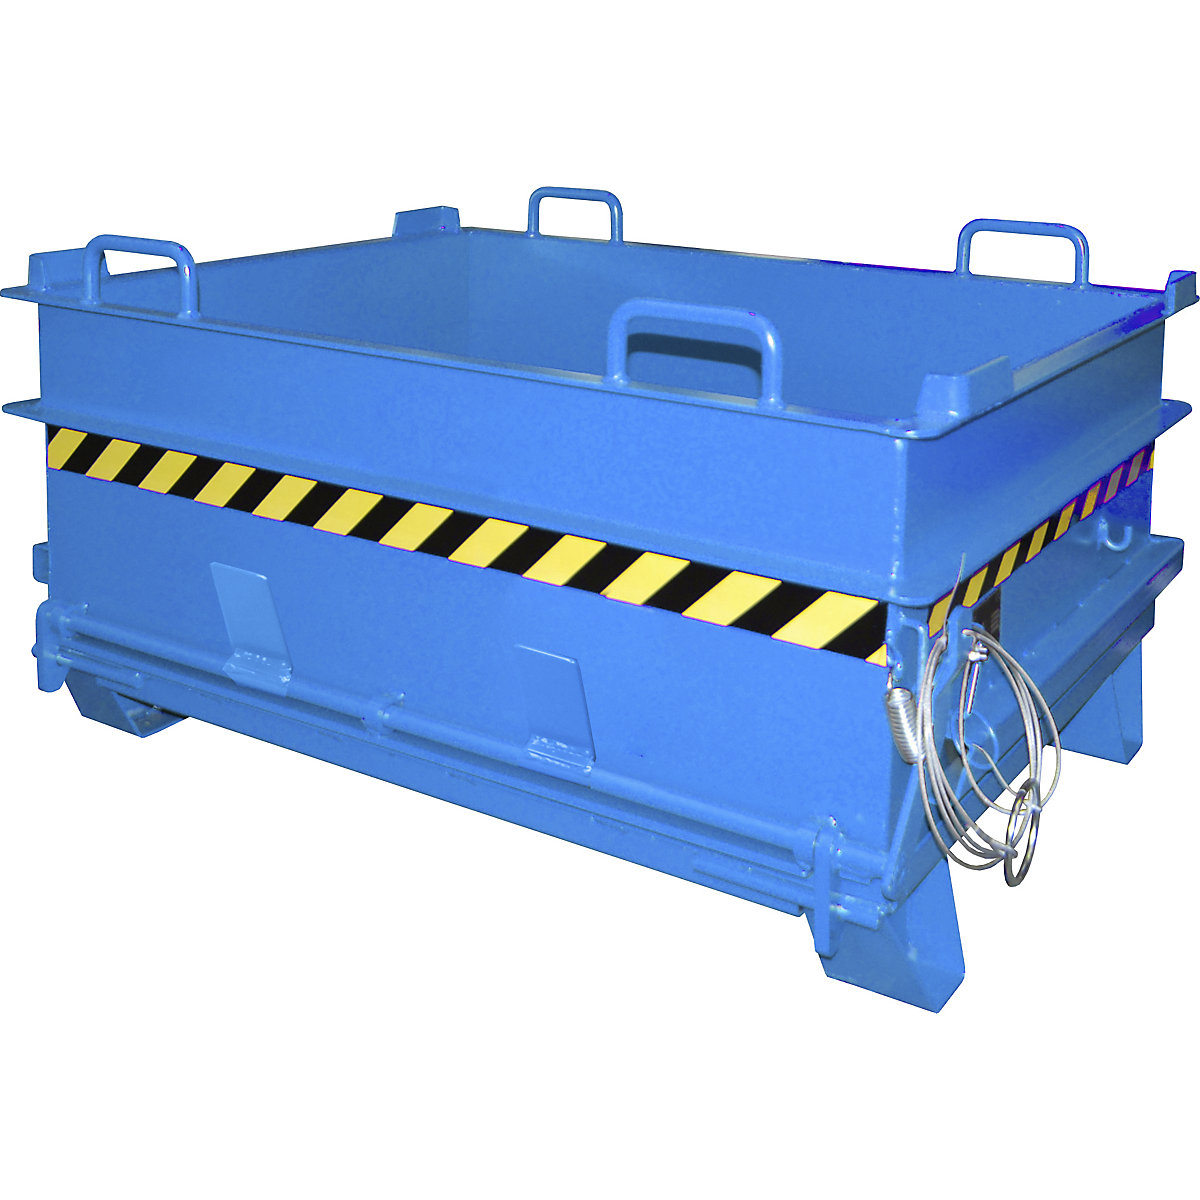 BC construction material container, with stone clamp release mechanism – eurokraft pro, WxH 1305 x 700 mm, light blue-2